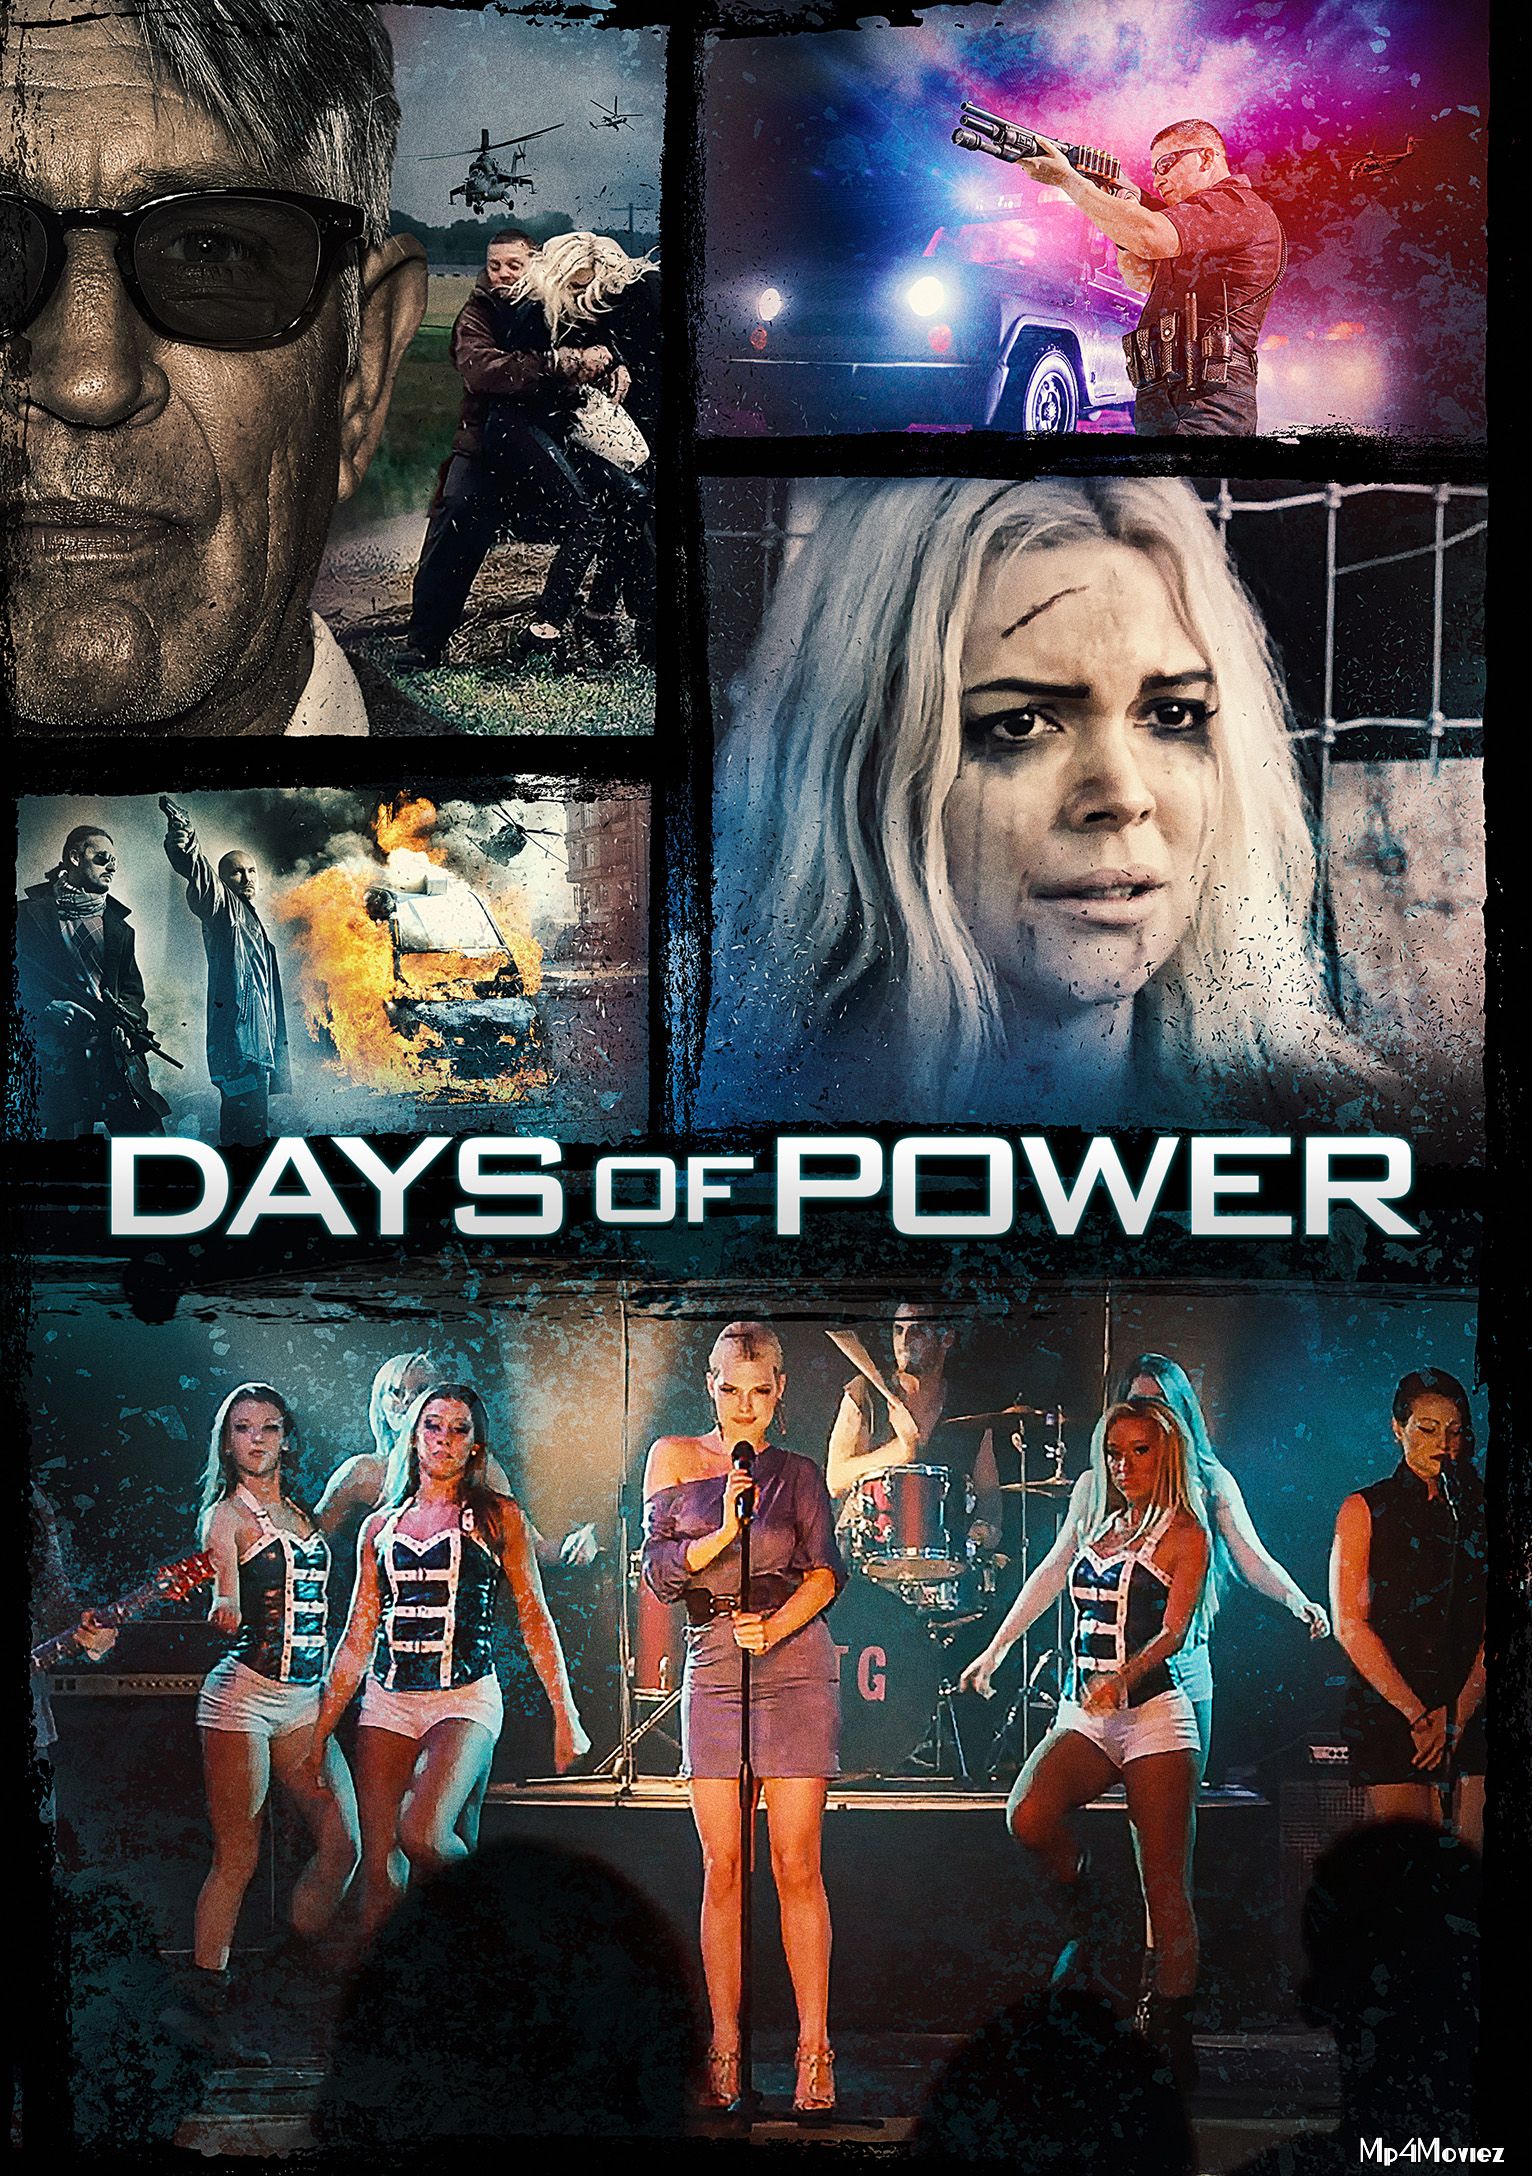 Days of Power 2018 Hindi Dubbed Movie download full movie